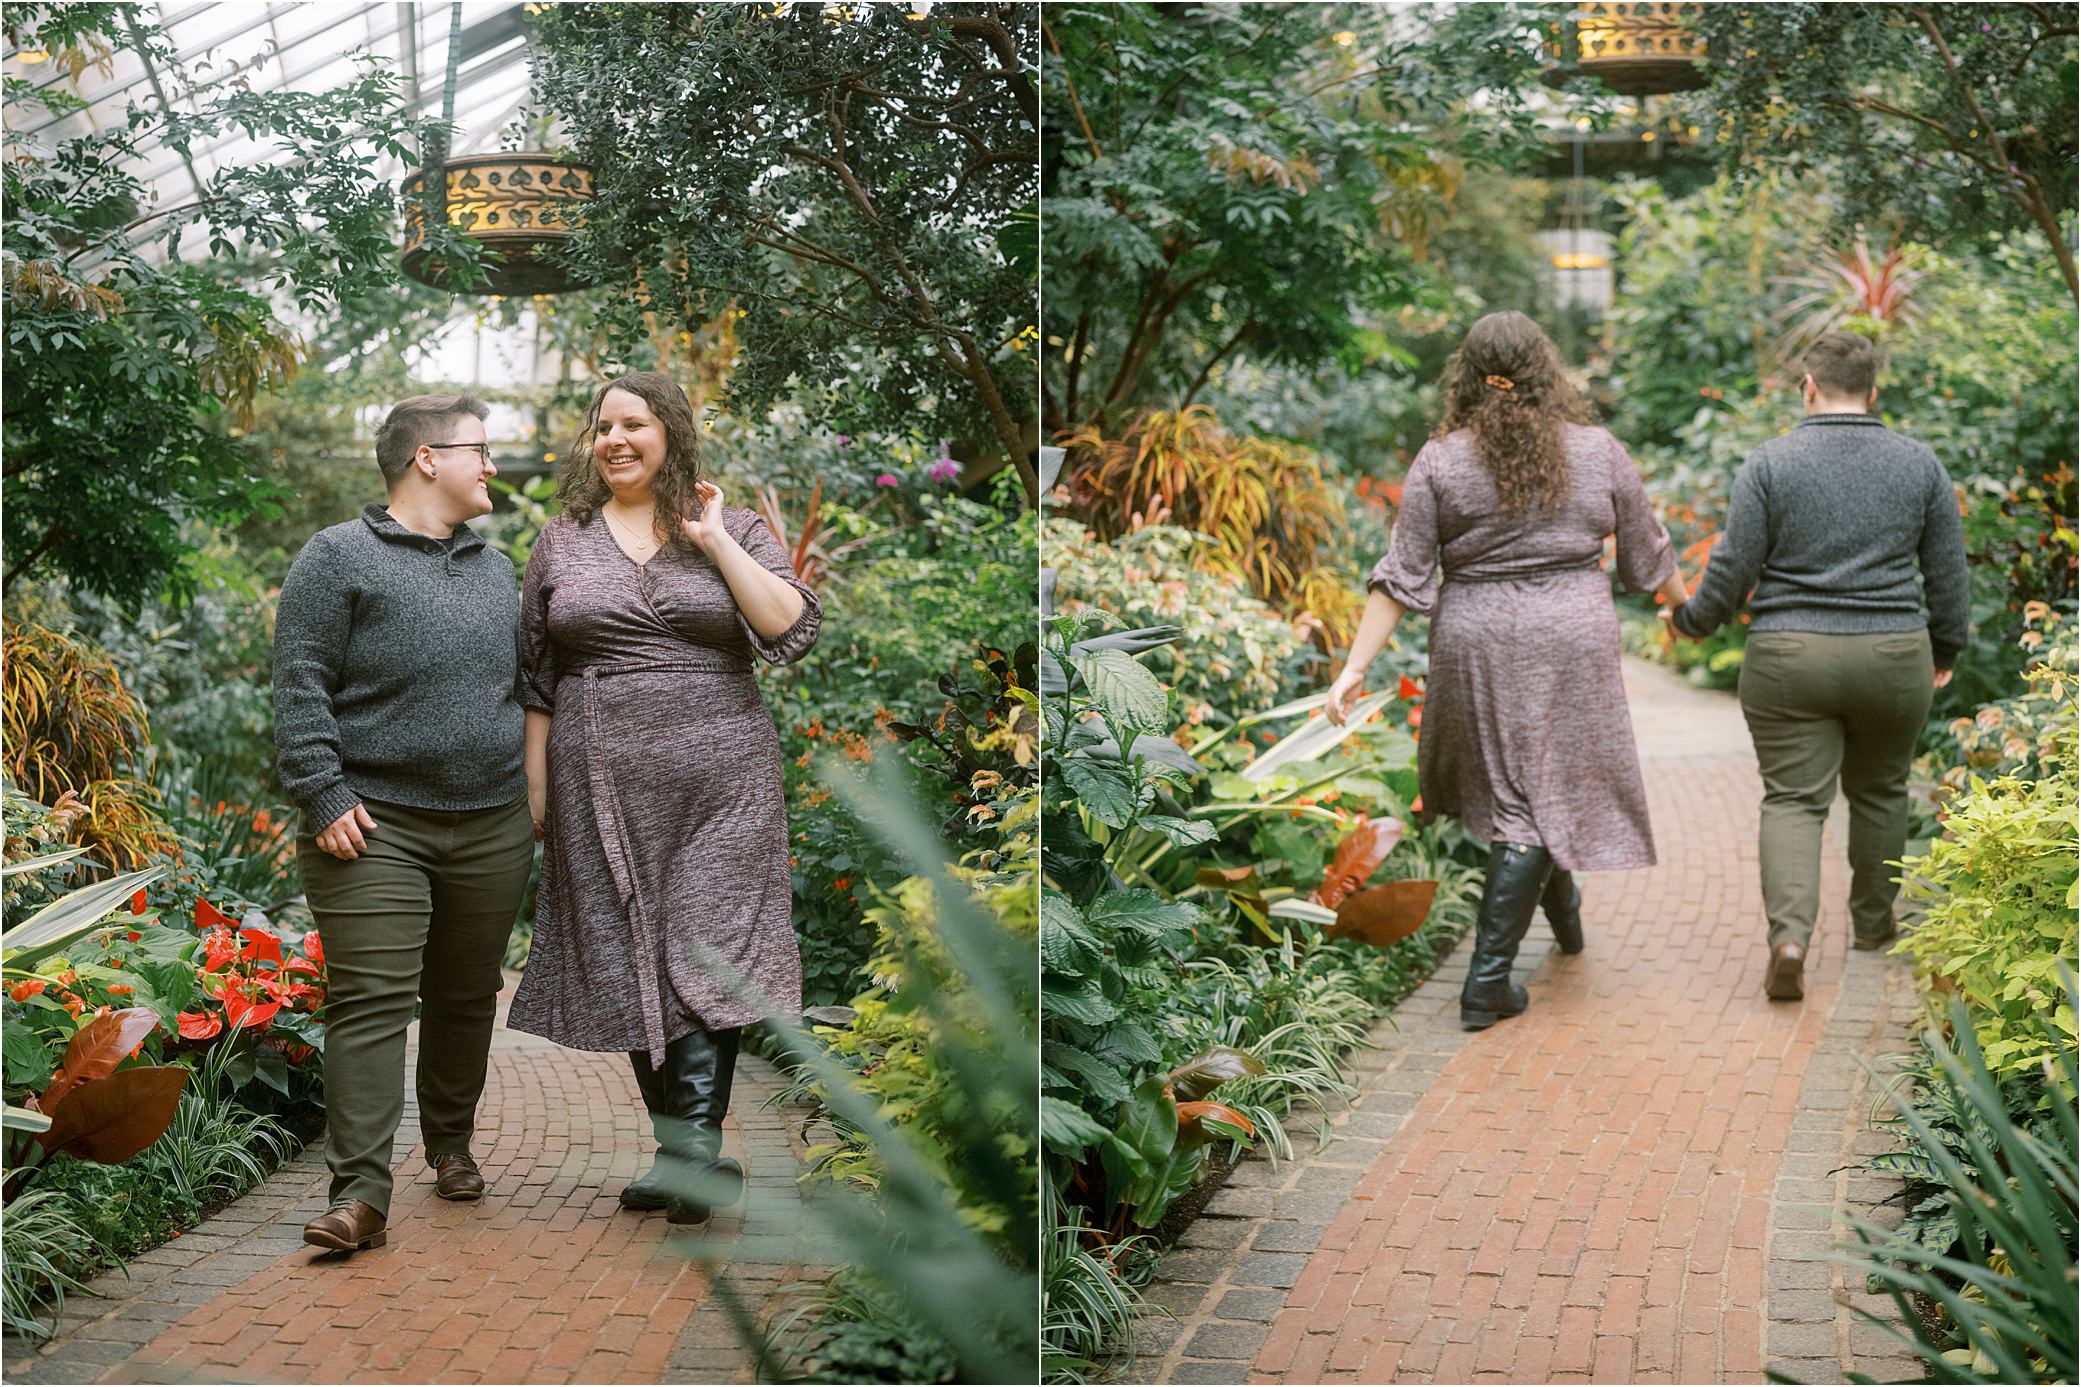 An engaged couple walks down a flower-lined path in a Philadelphia botanical garden.